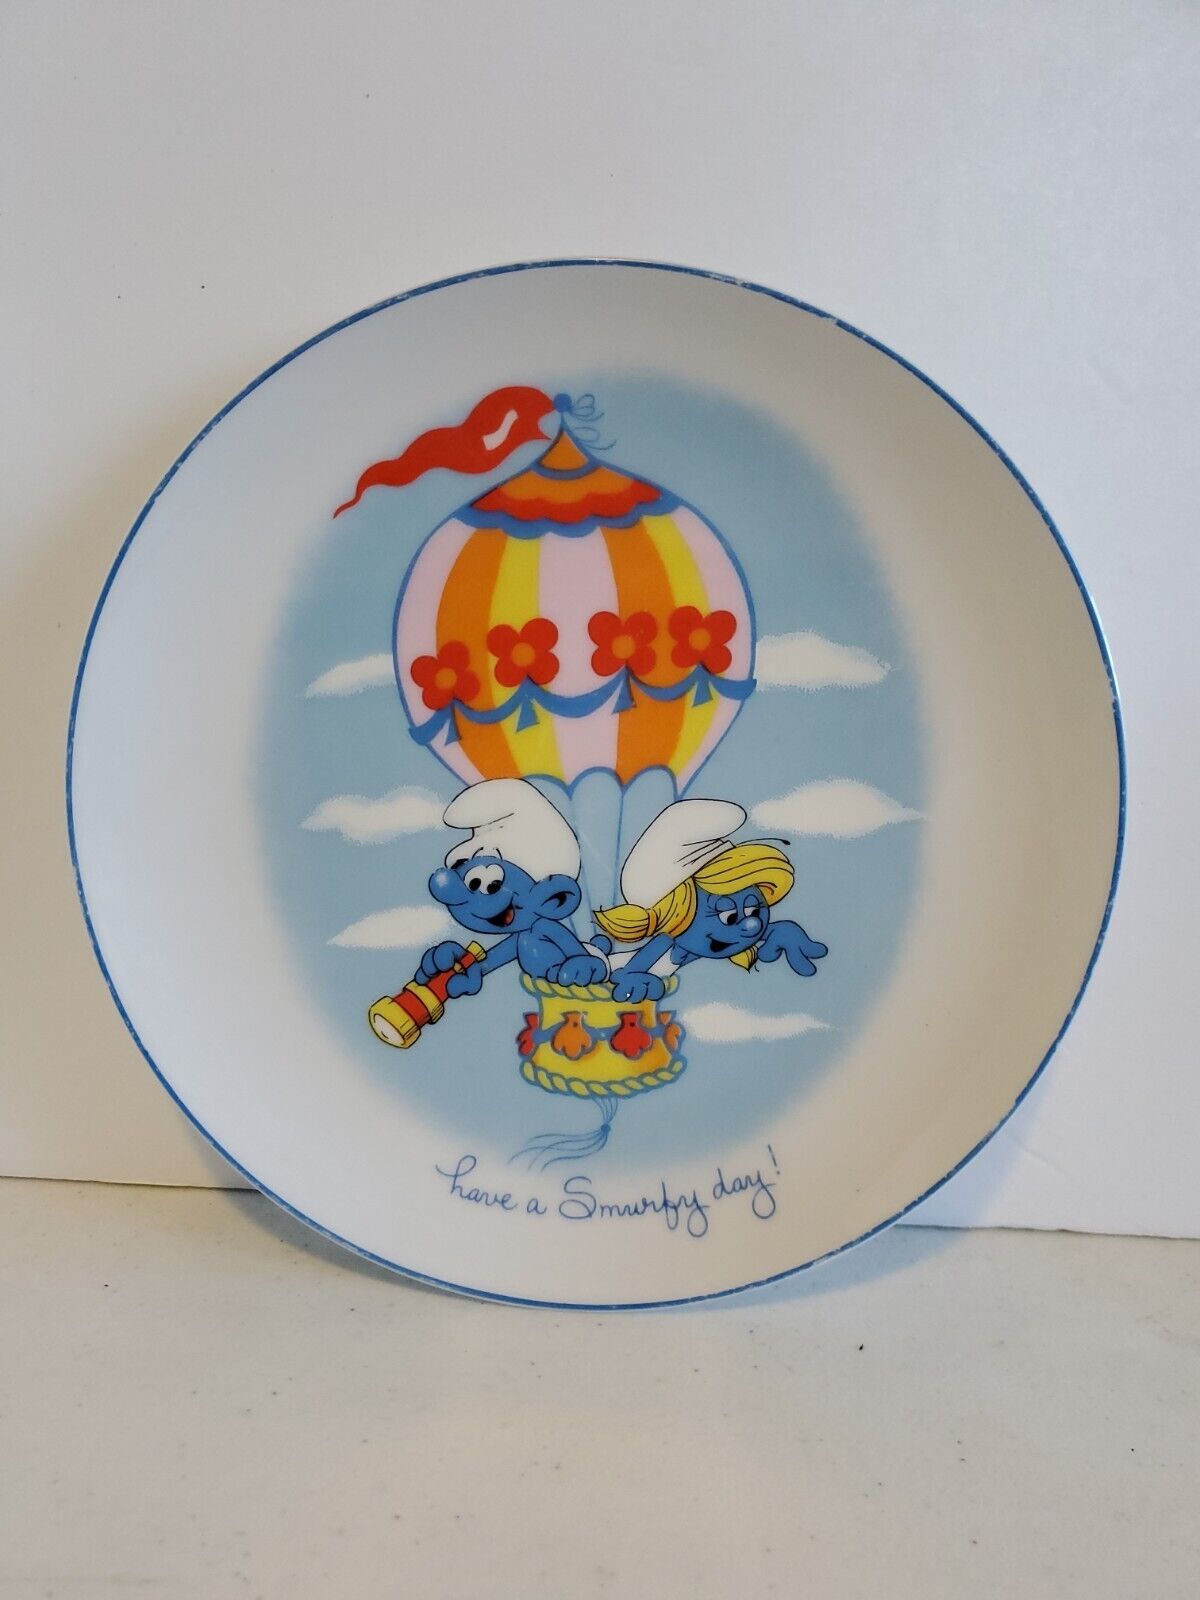 SMURF Have a SMURFY DAY Porcelain Plate SMURFETTE Wallace Berrie 1982